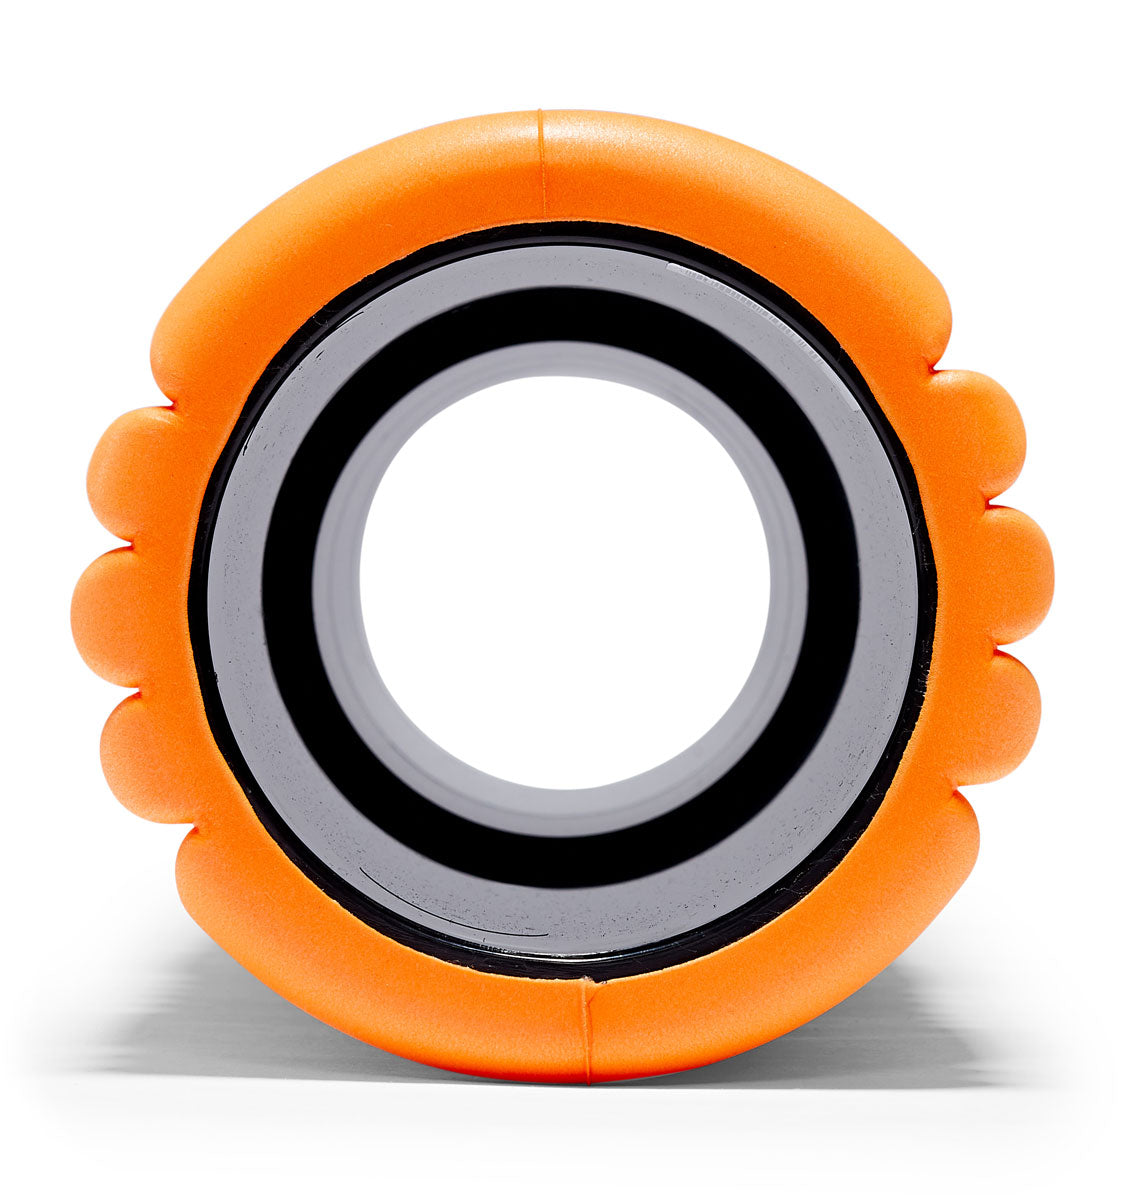 TPT3GRD2OWS0000 TriggerPoint The Grid 2.0 Foam Roller Orange - Circle Face